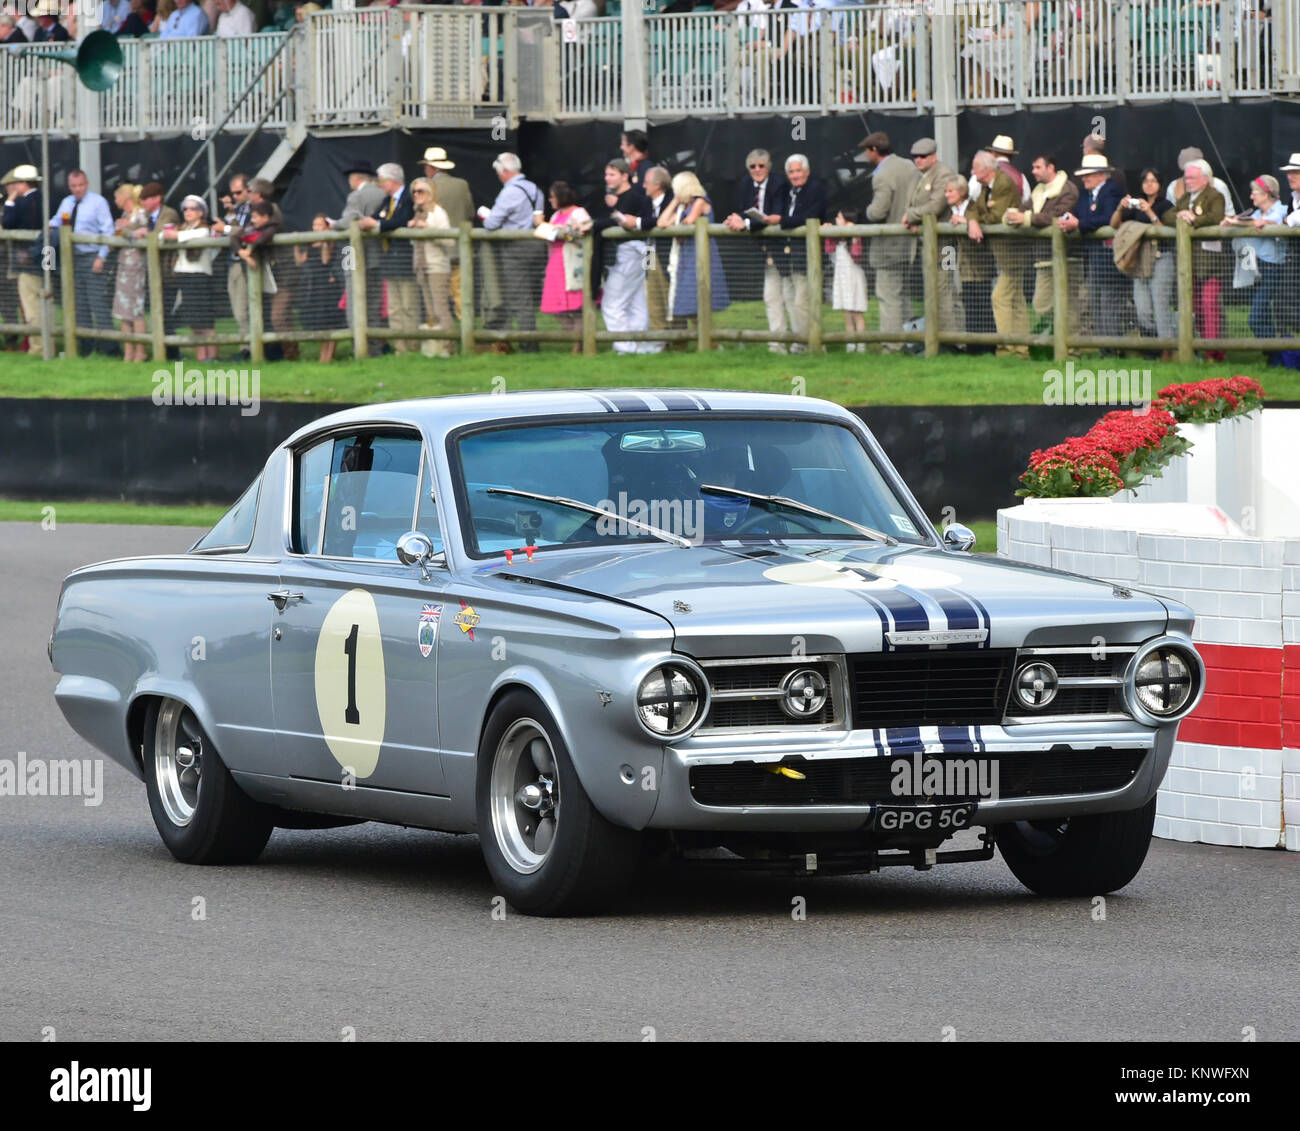 Oliver Bryant, Andrew Jordan, Plymouth Barracuda, GPG 5 C, Shelby Cup, Goodwood Revival 2014, 2014, automobile, Autosport, Goodwood Revival, Goodwood  Stock Photo